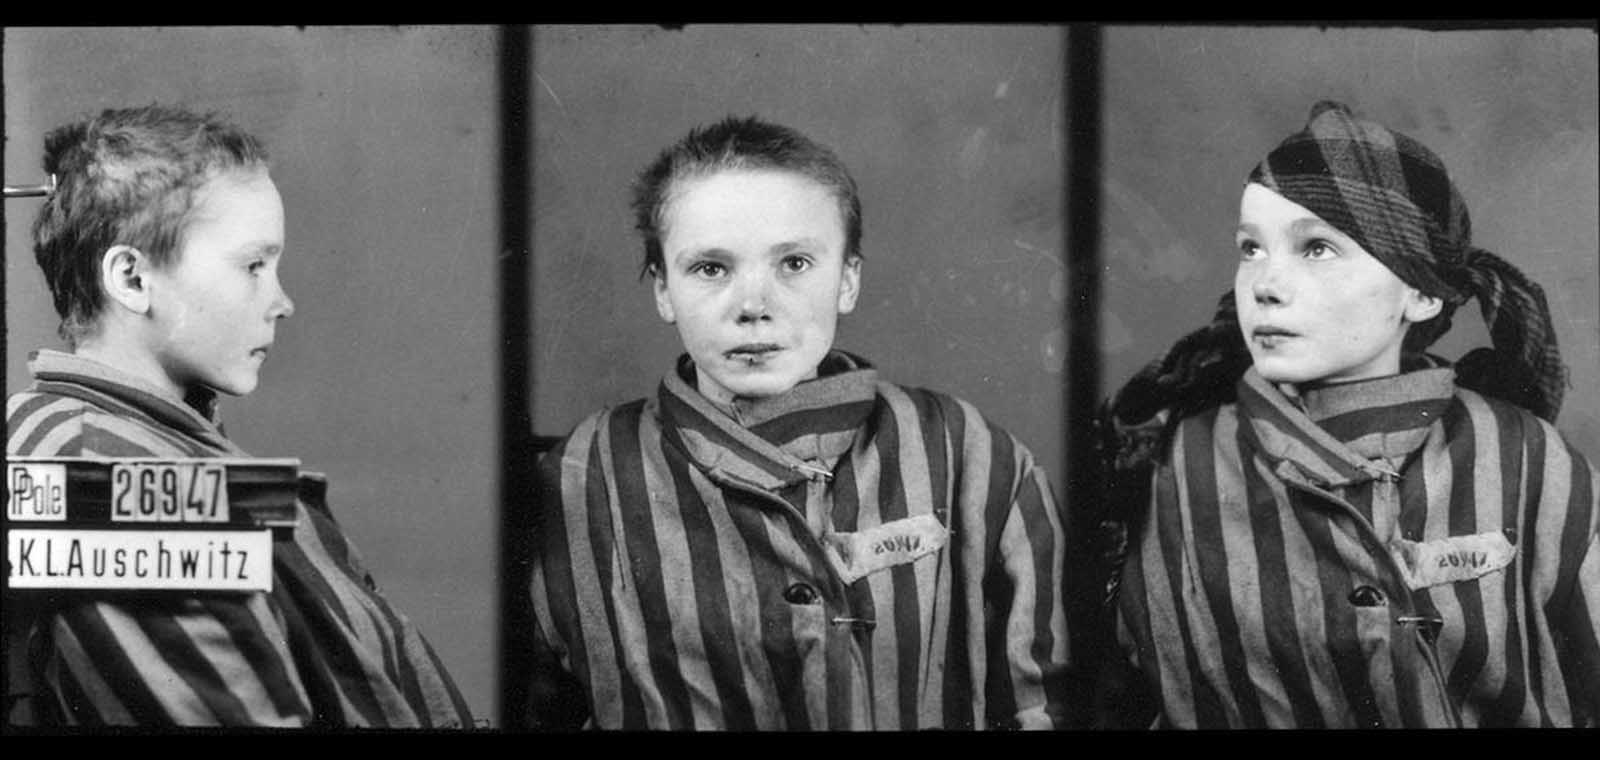 Czeslawa Kwoka, age 14, appears in a prisoner identity photo provided by the Auschwitz Museum, taken by Wilhelm Brasse while working in the photography department at Auschwitz, the Nazi-run death camp where some 1.5 million people, most of them Jewish, died during World War II. Czeslawa was a Polish Catholic girl, from Wolka Zlojecka, Poland, who was sent to Auschwitz with her mother in December of 1942. Within three months, both were dead. Photographer (and fellow prisoner) Brasse recalled photographing Czeslawa in a 2005 documentary: 